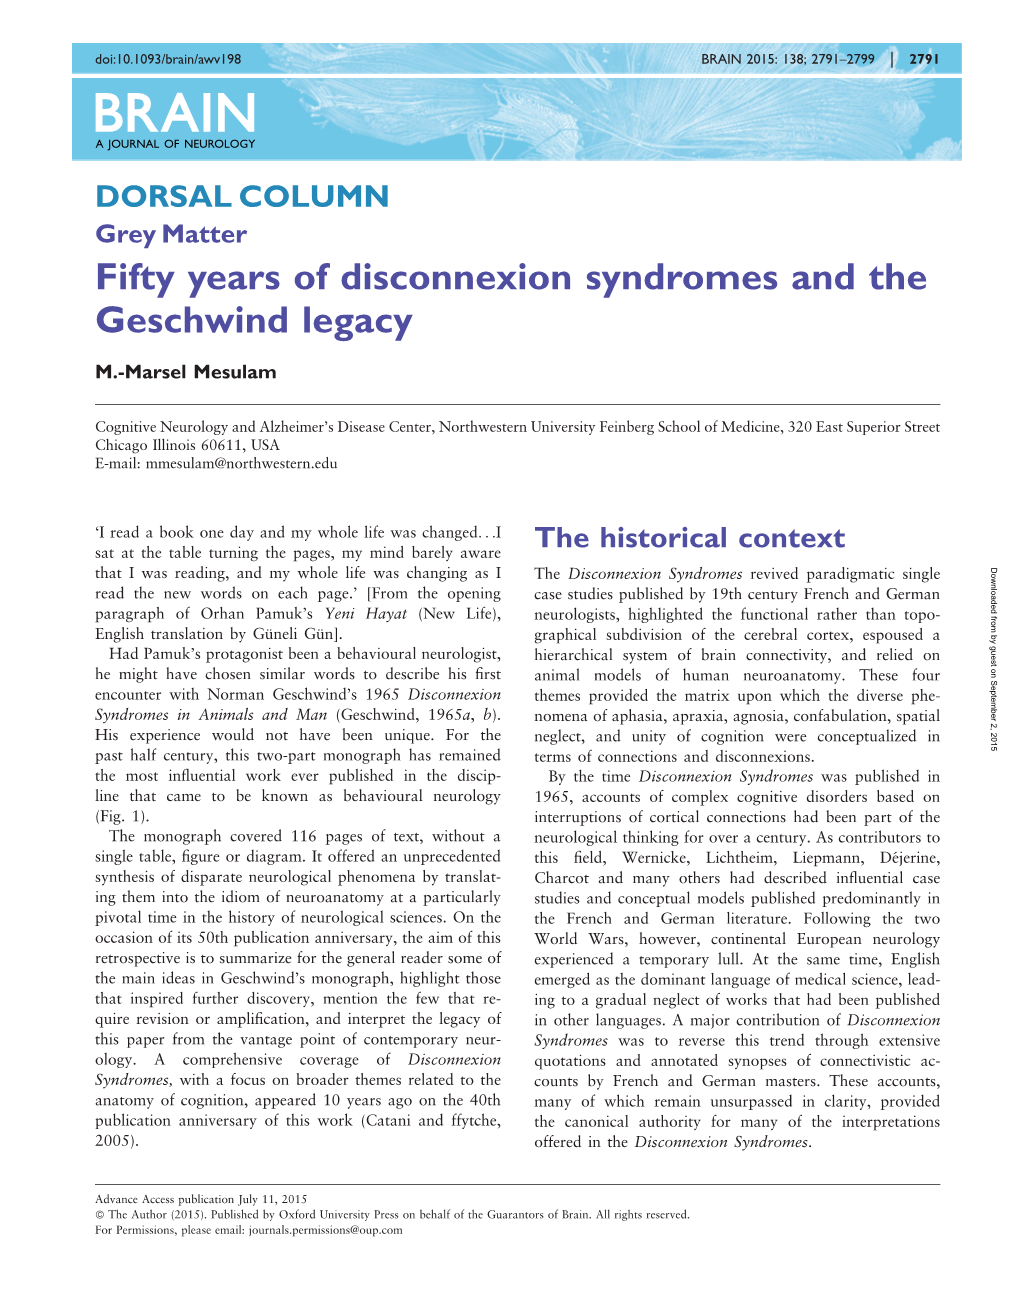 Fifty Years of Disconnexion Syndromes and the Geschwind Legacy